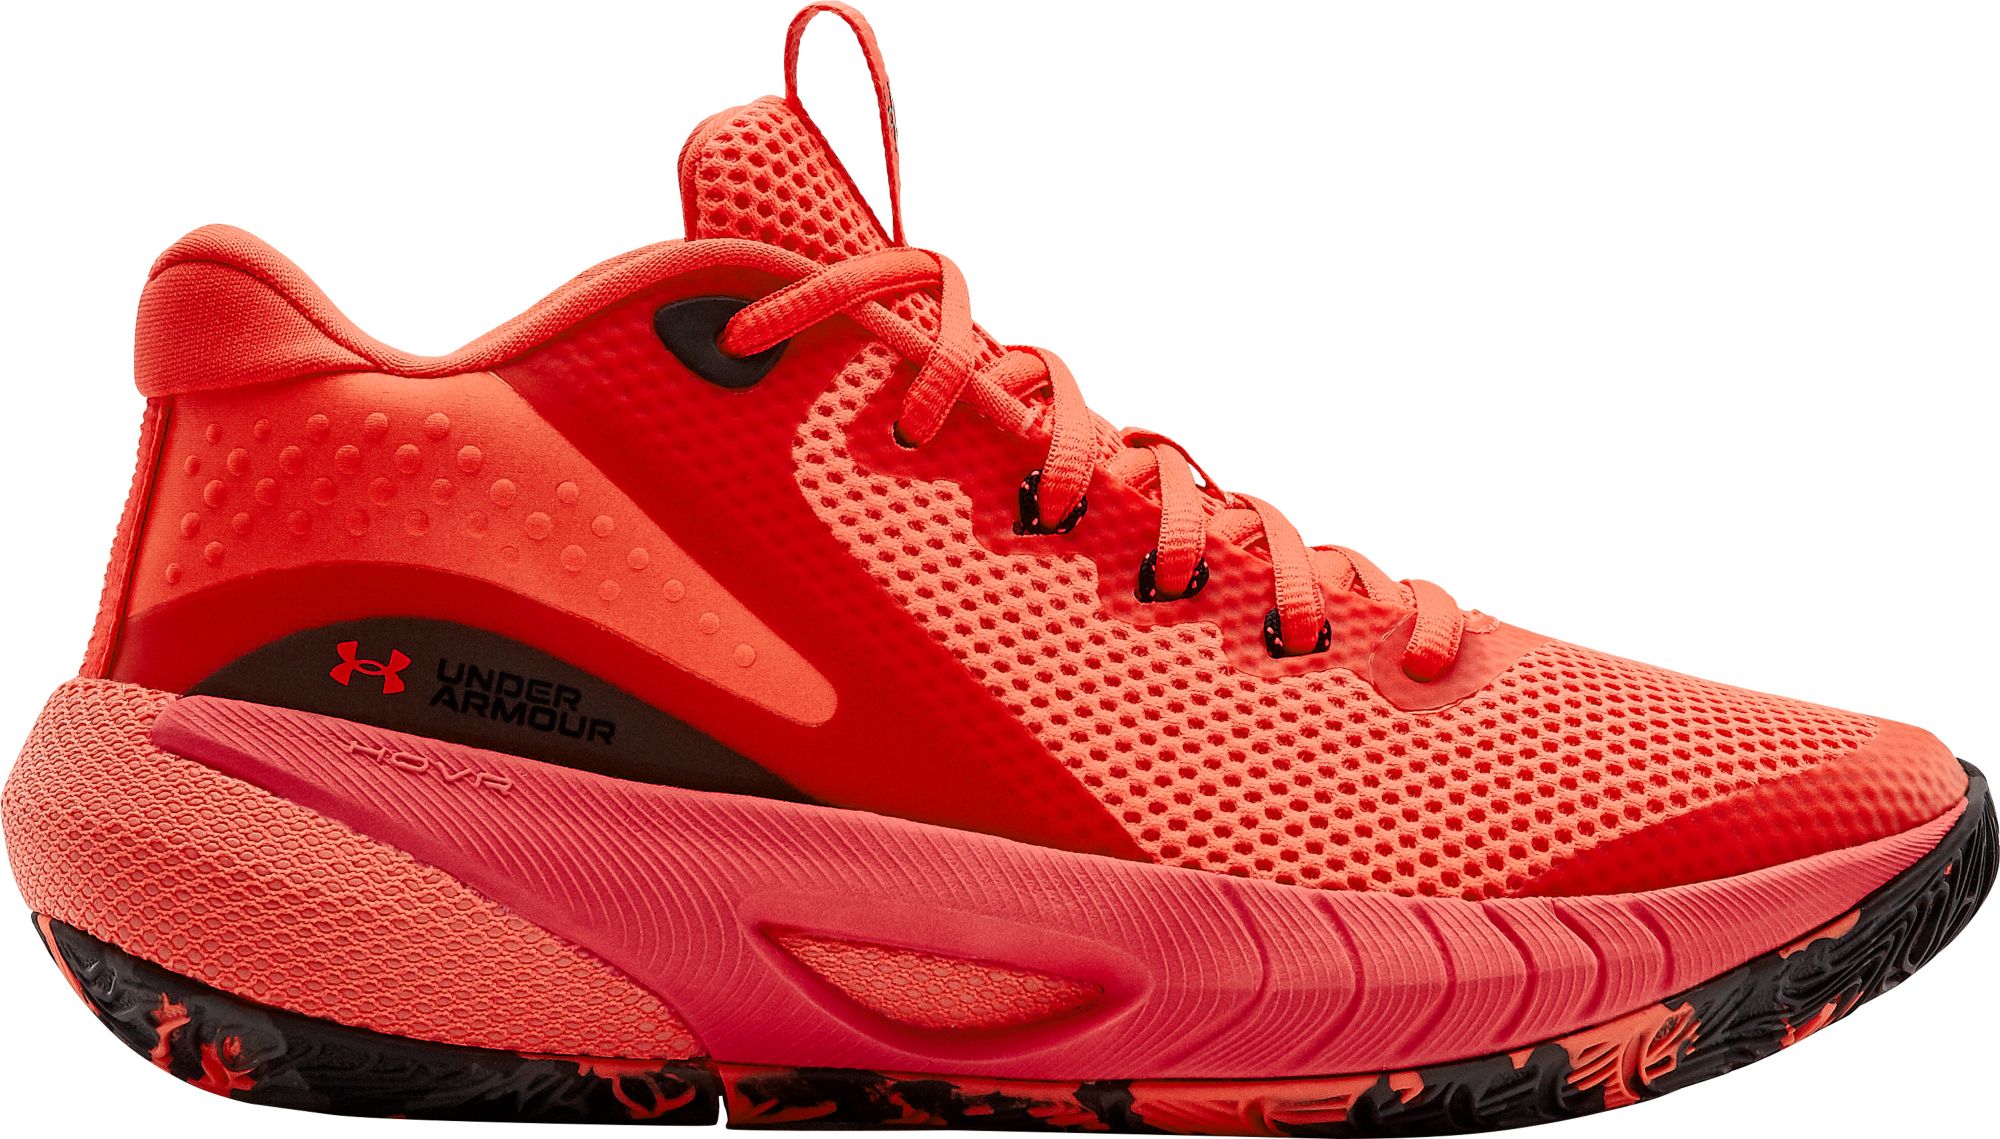 under armor womens basketball shoes